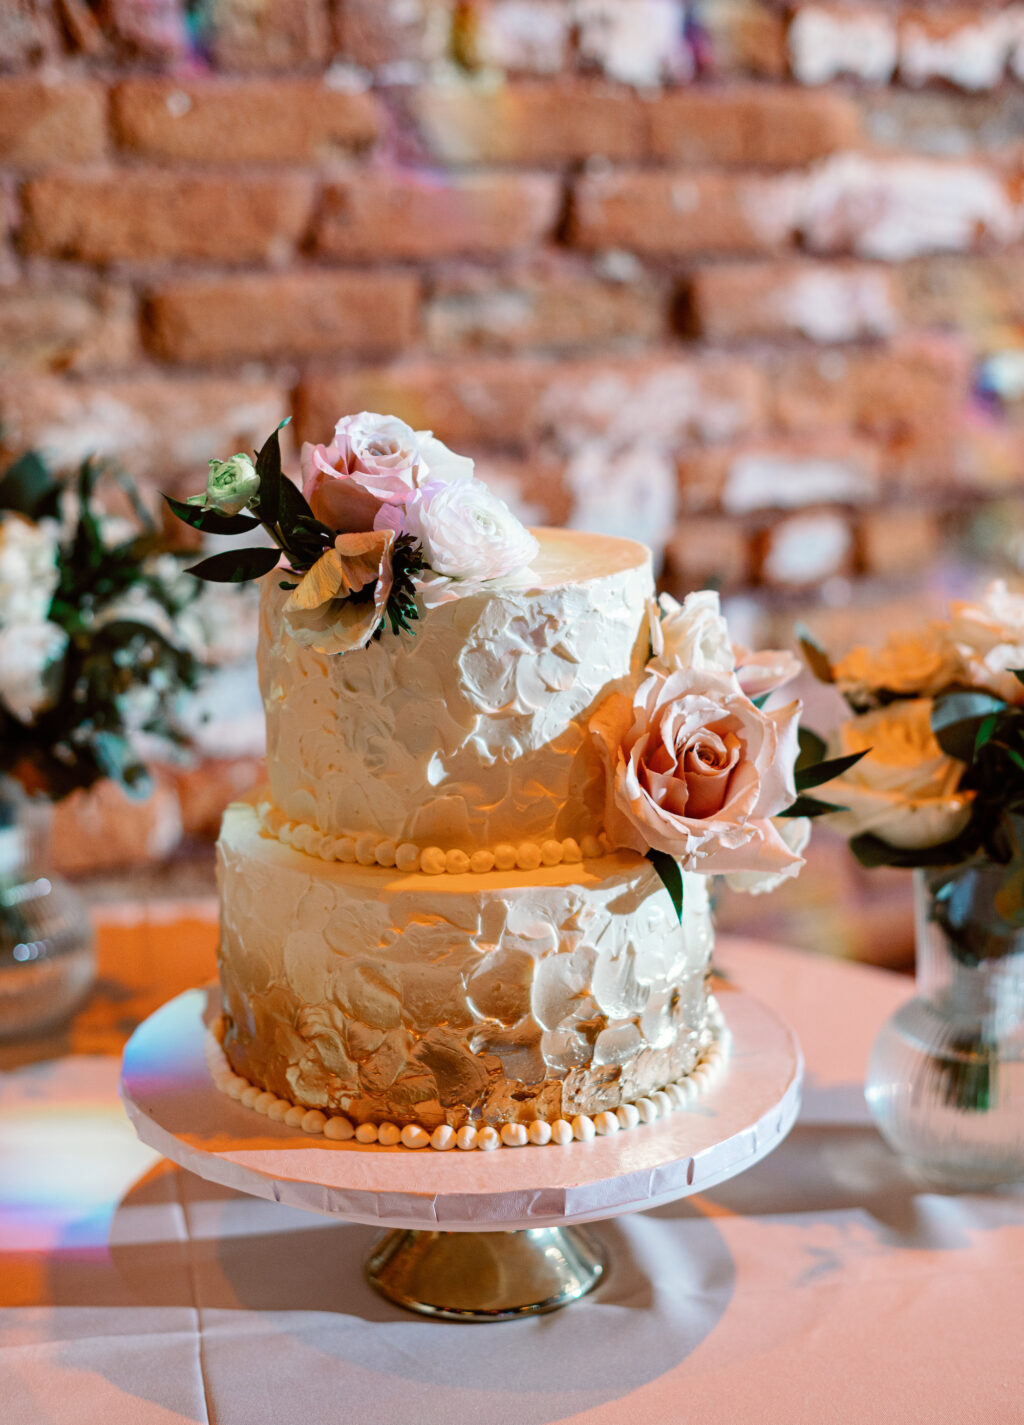 Two Tiered Round Buttercream Textured Wedding Cake with Blush Pink Roses | Tampa Wedding Cake The Artistic Whisk